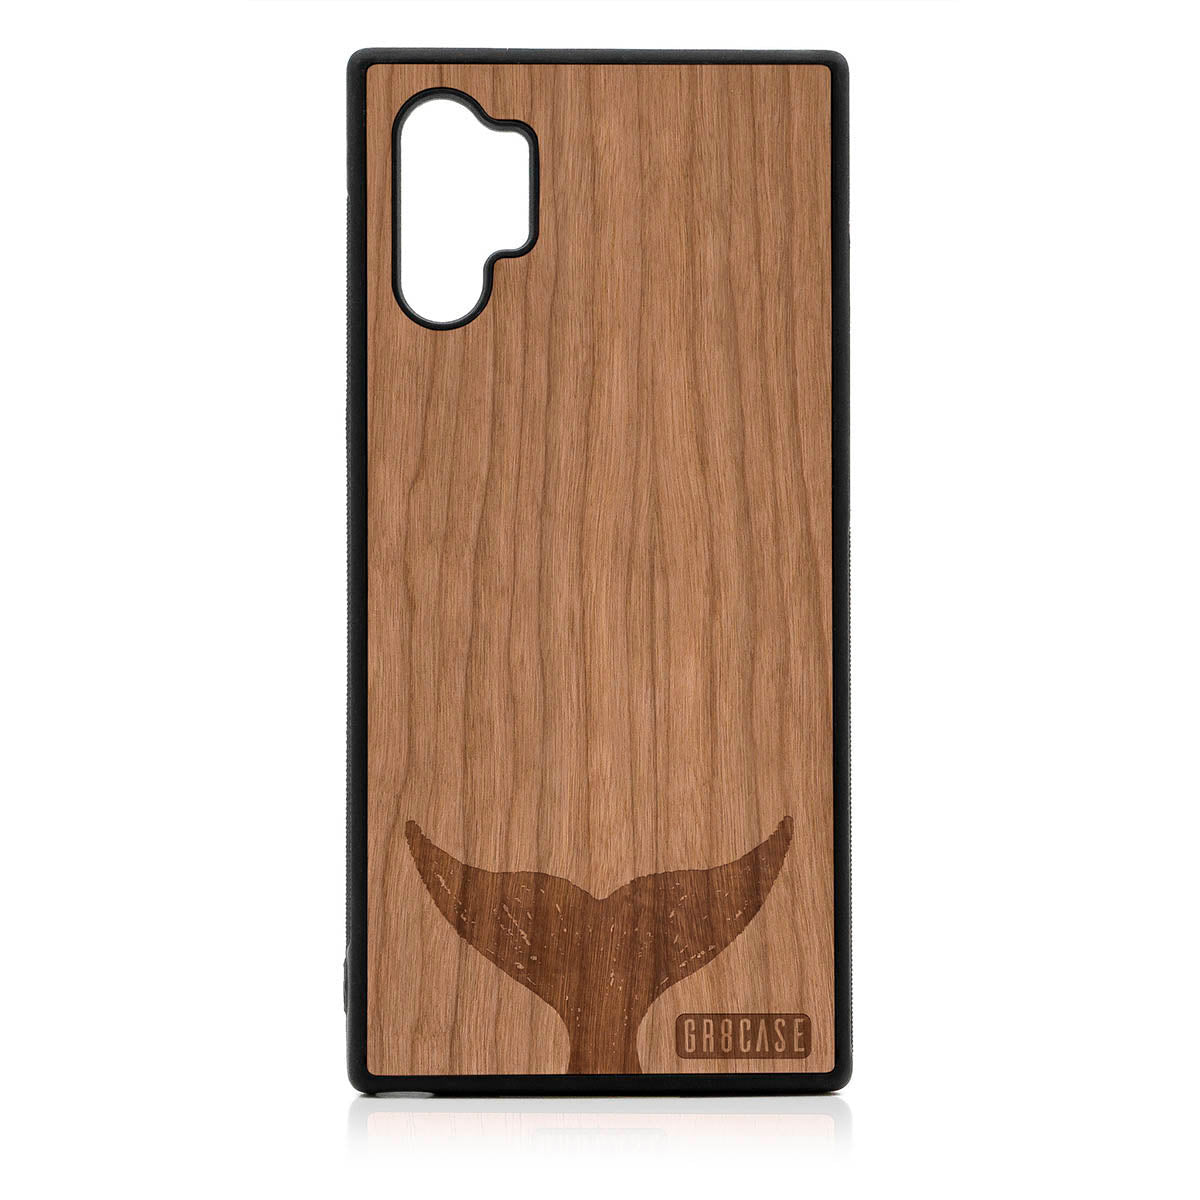 Whale Tail Design Wood Case For Samsung Galaxy Note 10 Plus